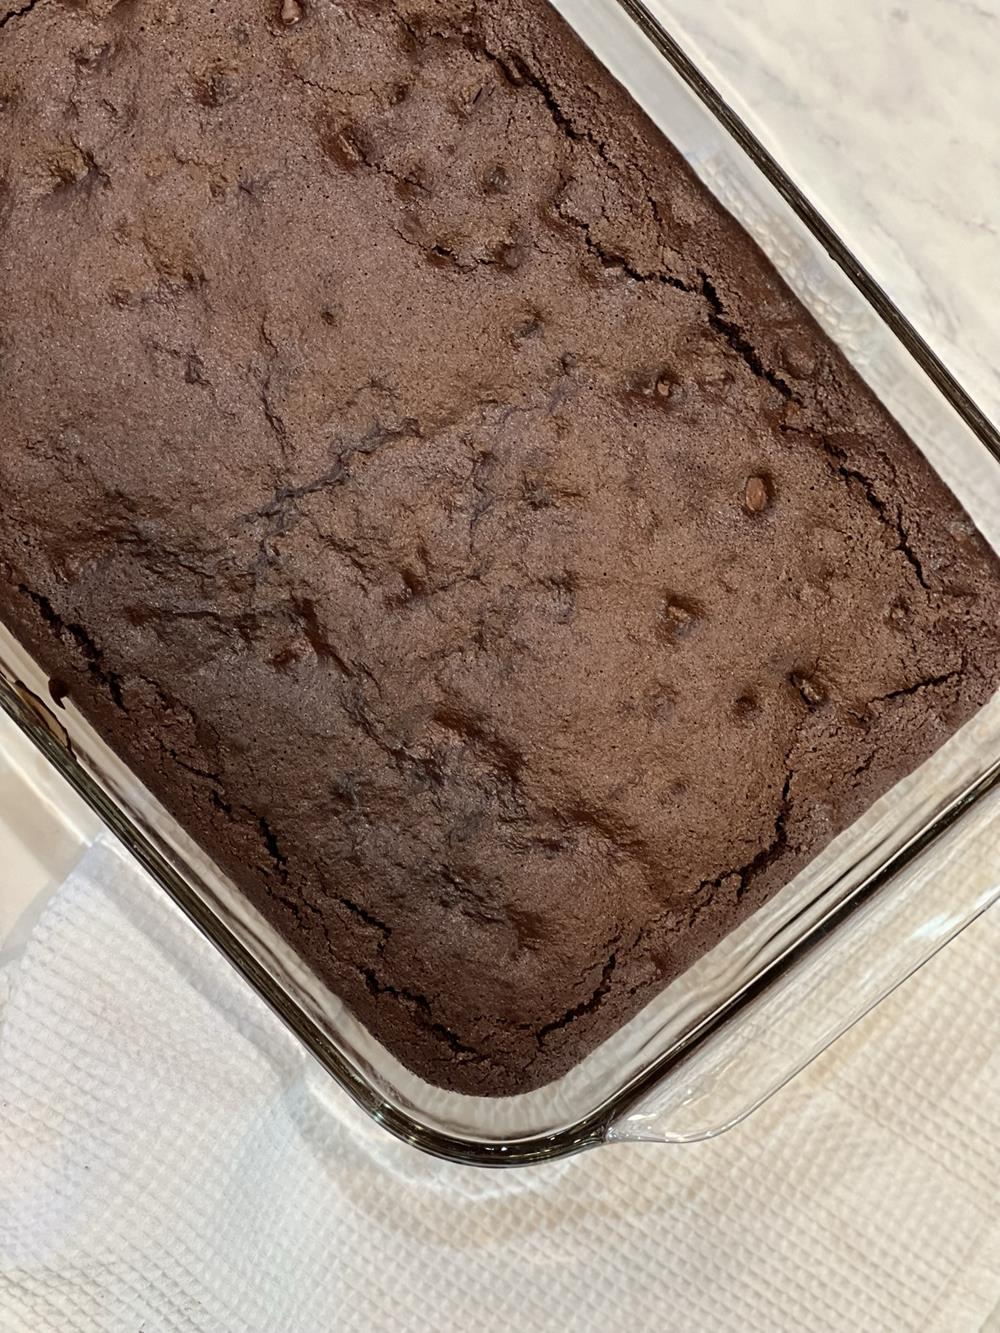 Double Chocolate Gluten Free Brownies in glass pan on white napkin